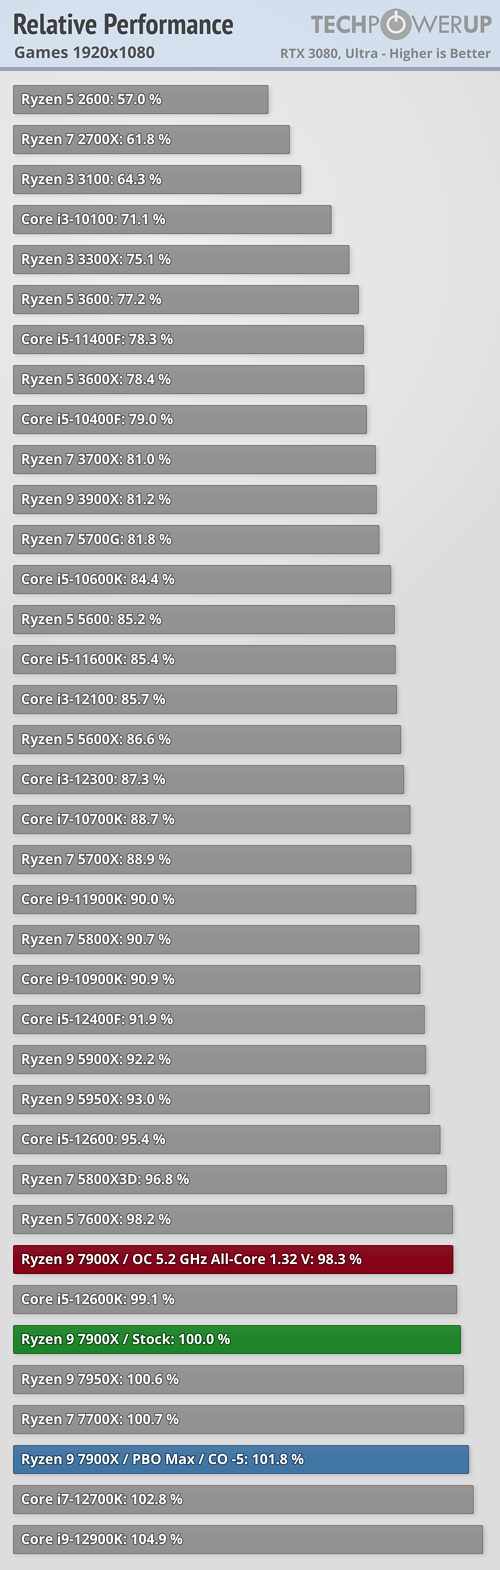 Ryzen 7 7800X3D: Ahead of Core i9 for gaming at 40% power draw